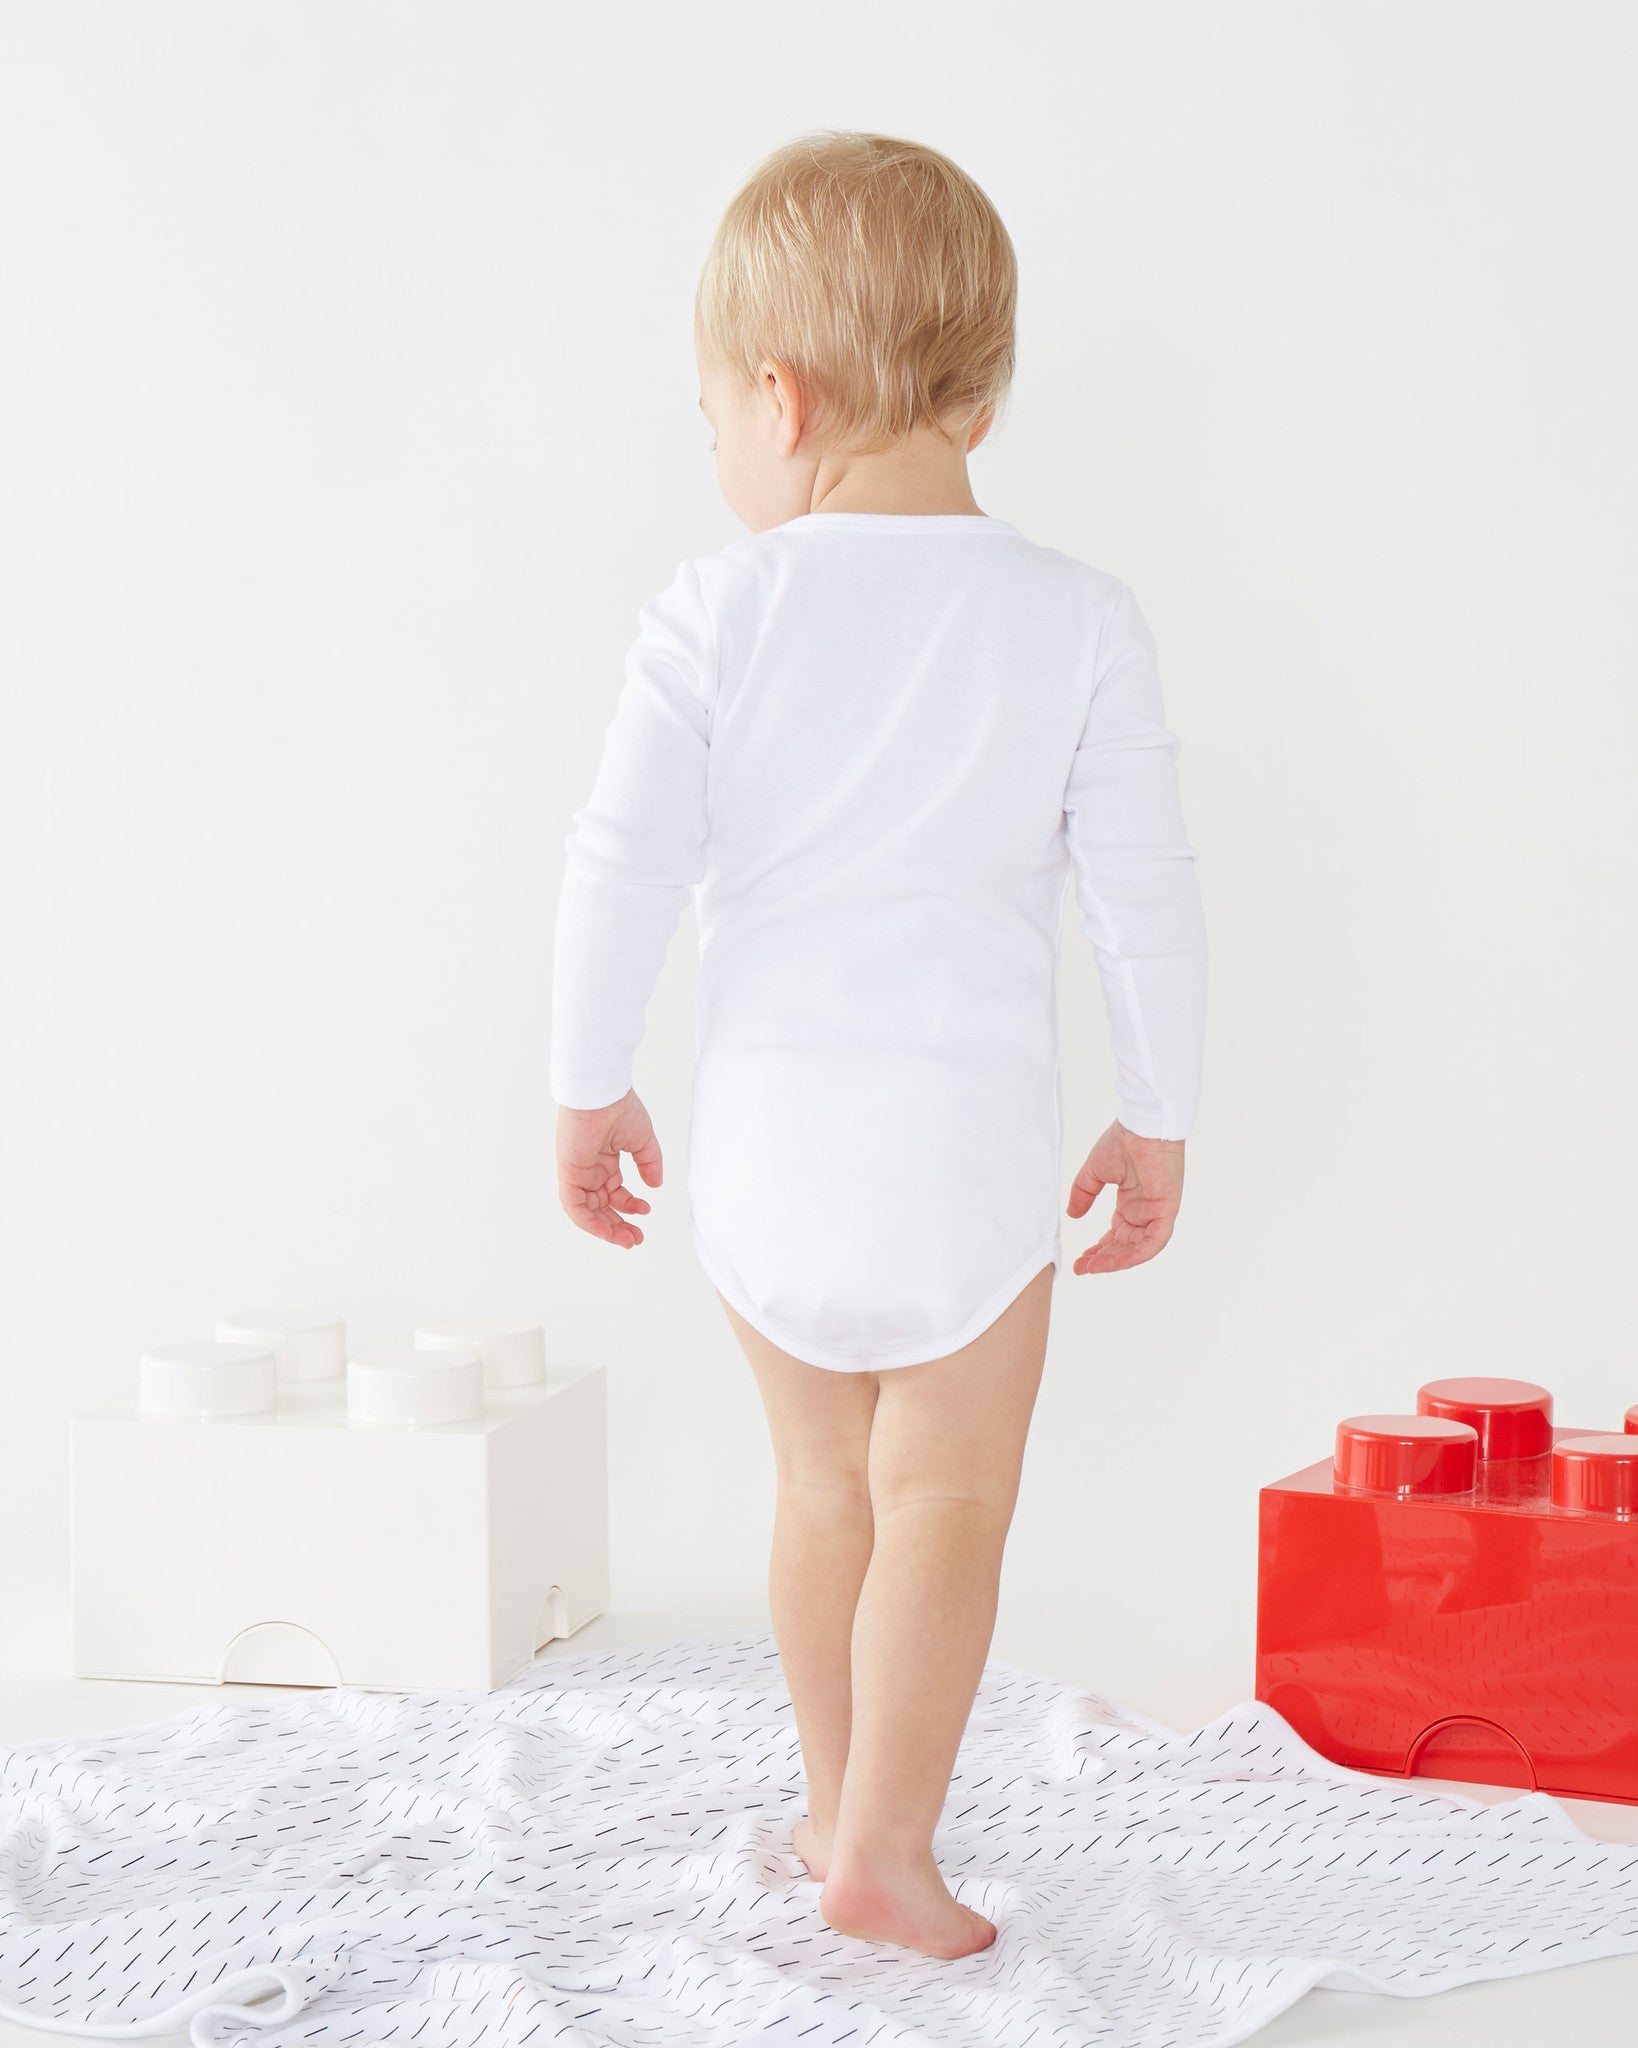 The Organic Long Sleeve Onesie #color_White